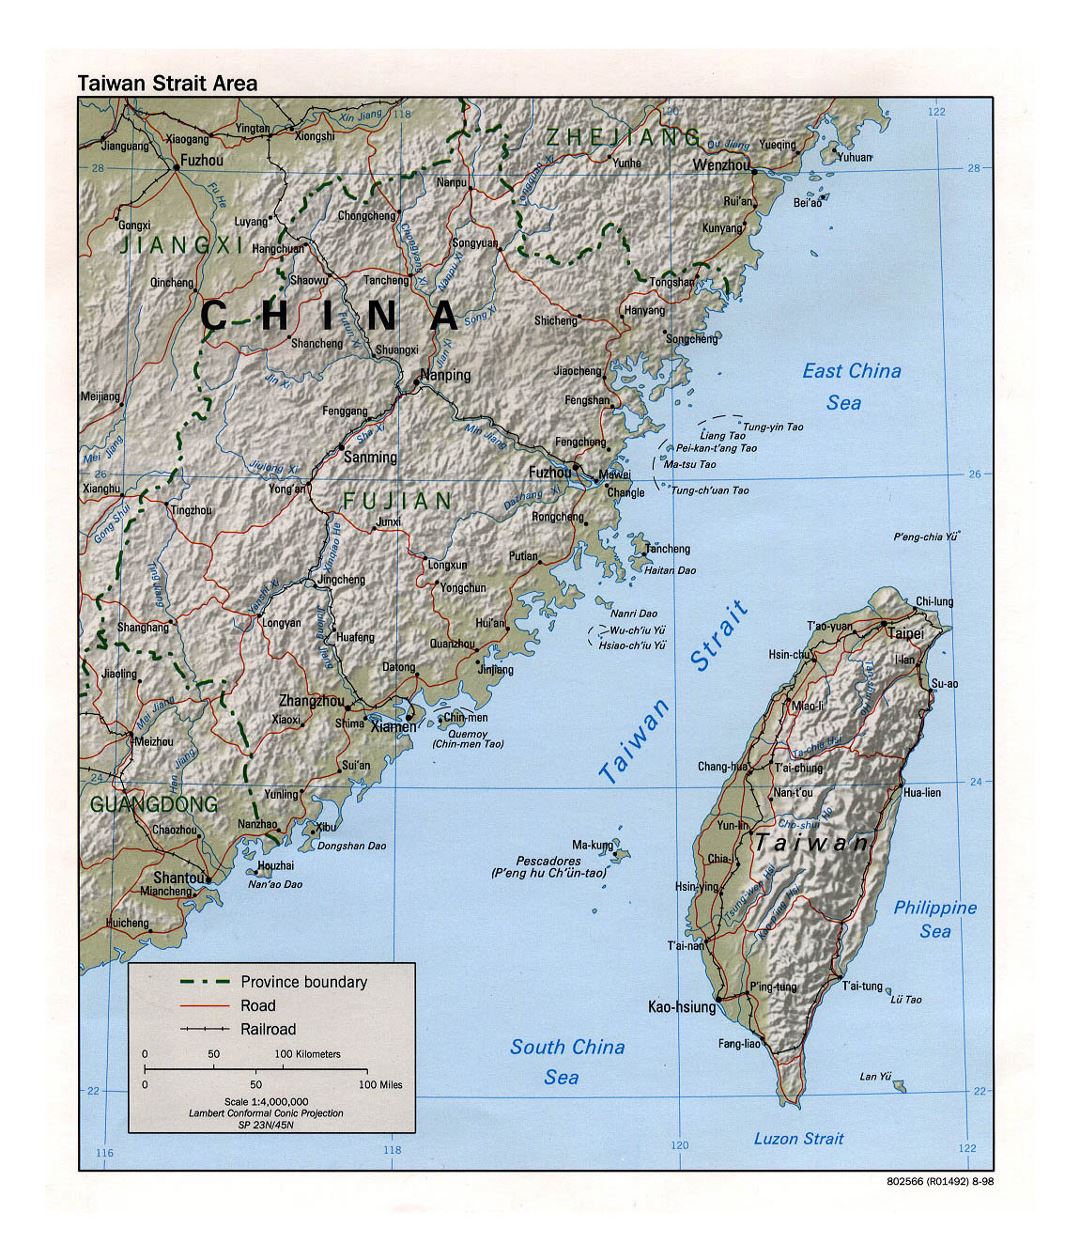 Detailed Taiwan Strait Area map with relief, roads, railroads and major cities - 1998